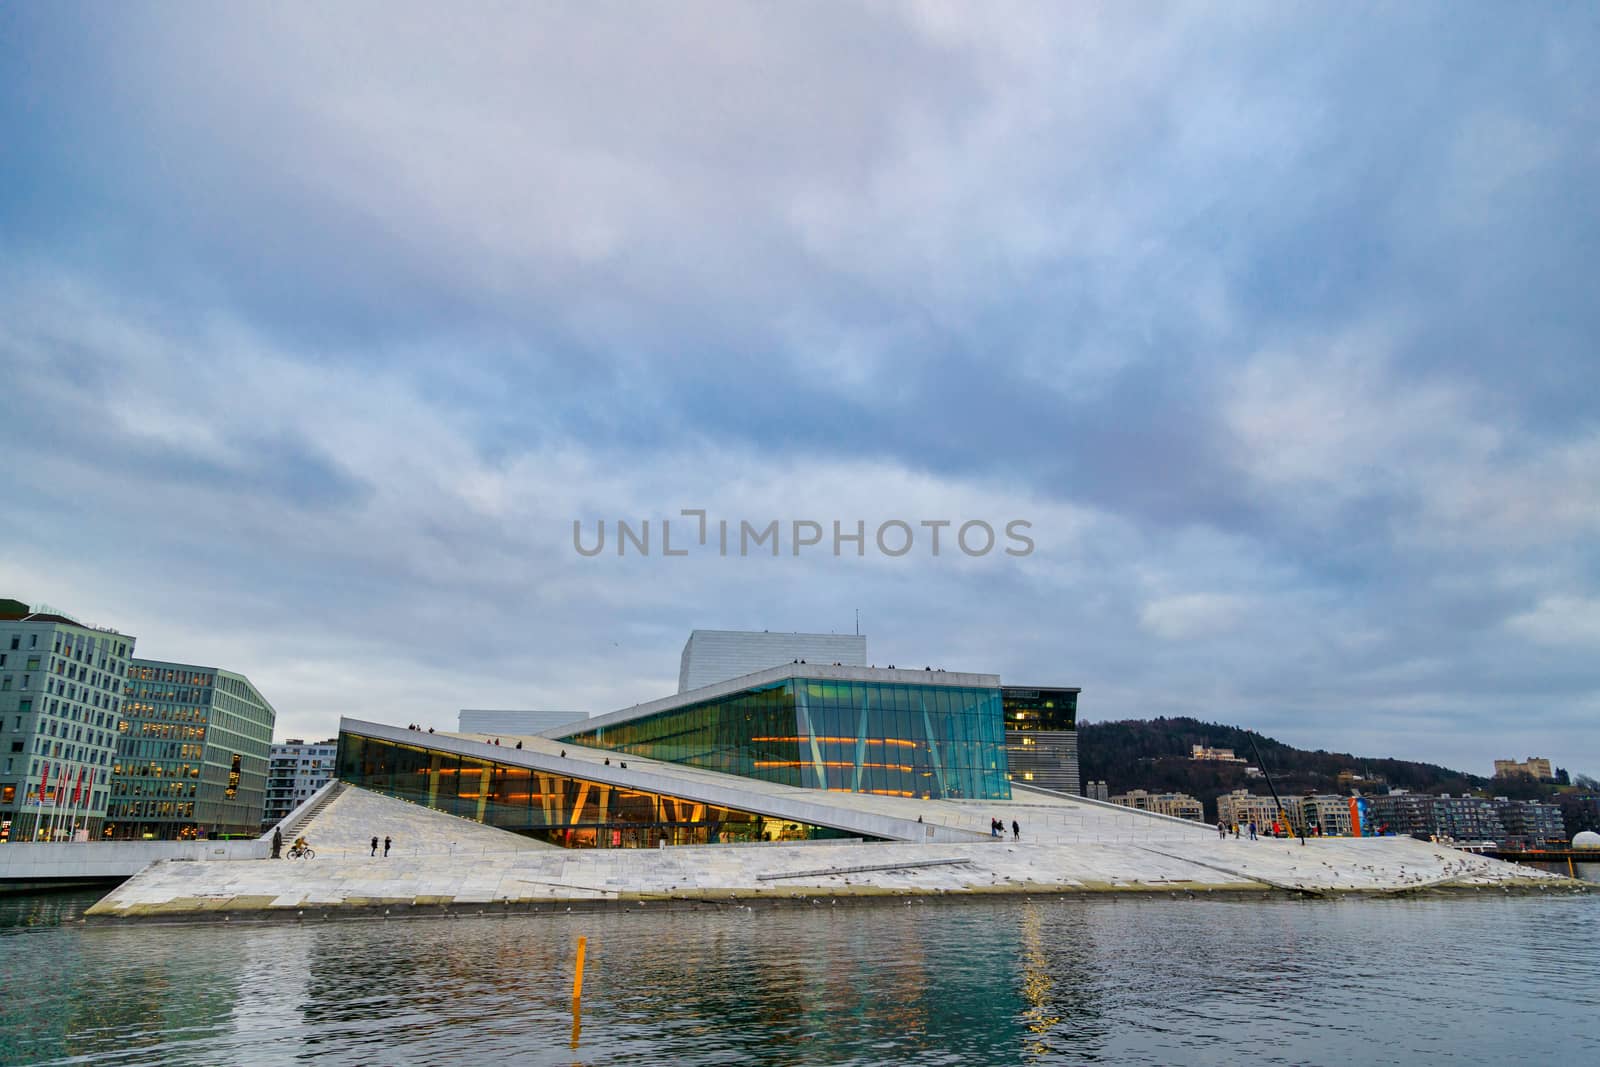 OSLO, NORWAY - CIRCA 2020: Beautiful view from the fjord to the National Oslo Opera House